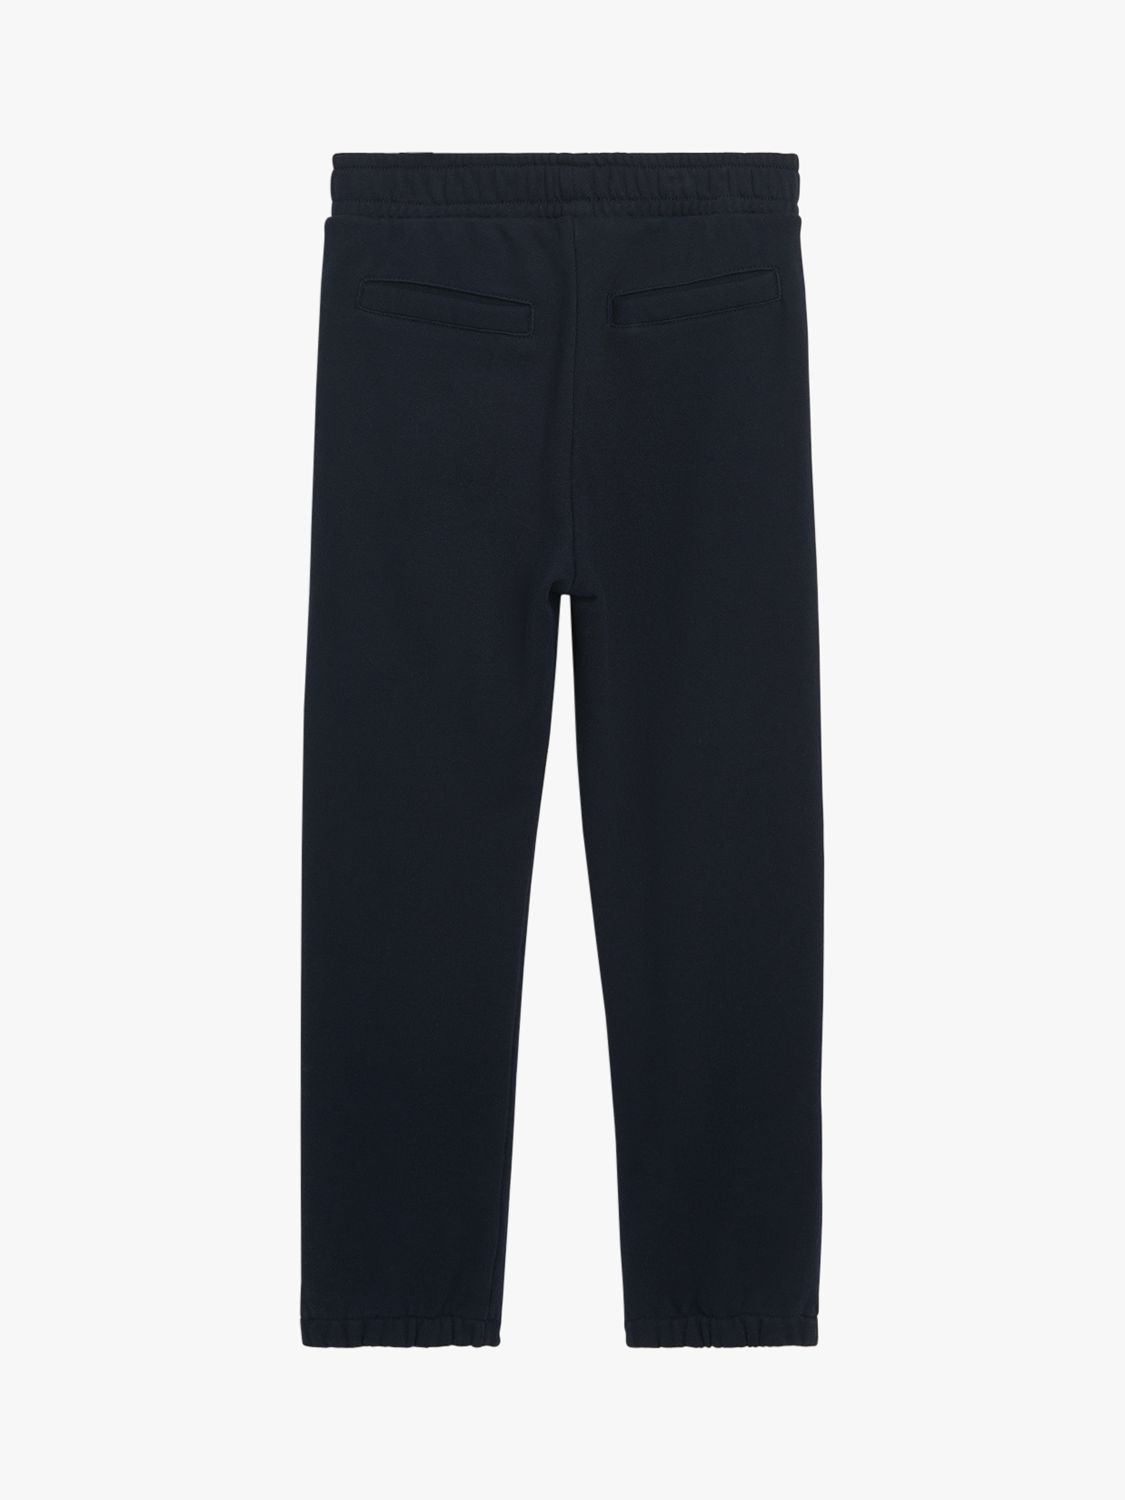 Buy Whistles Kids' Sawyer Jersey Joggers Online at johnlewis.com